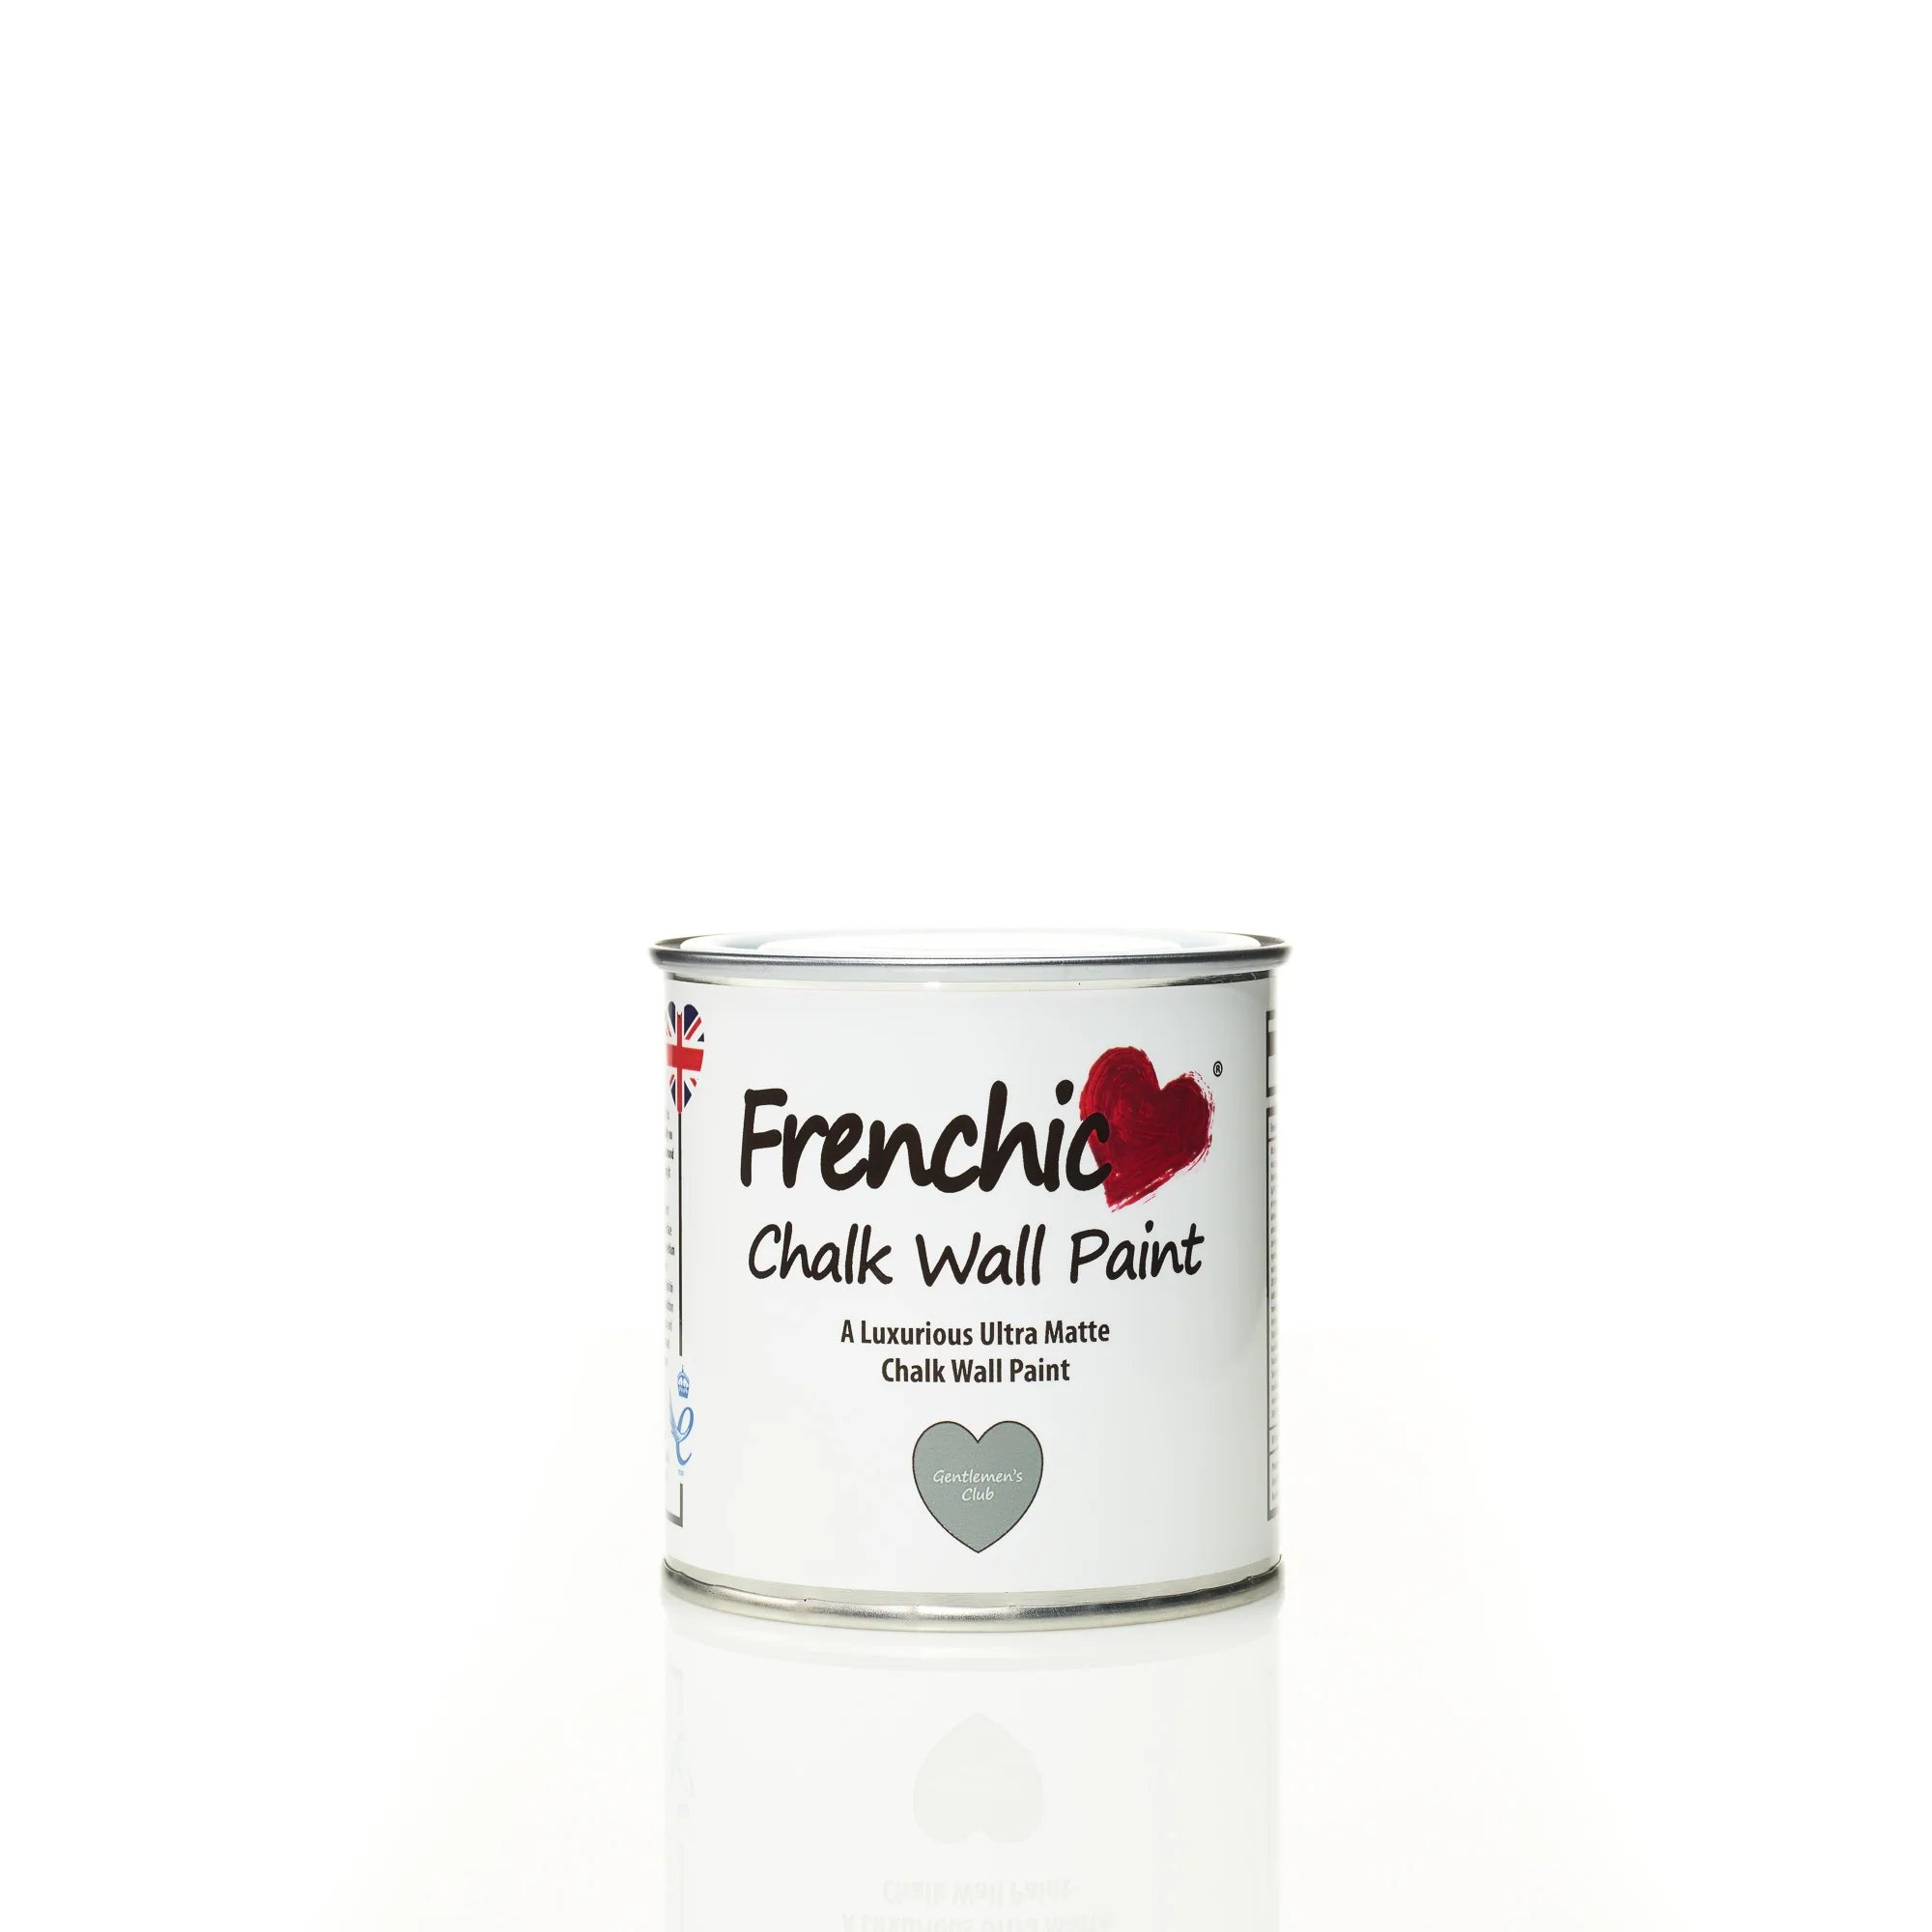 Frenchic Paint | Gentlemen's Club Wall Paint by Weirs of Baggot St